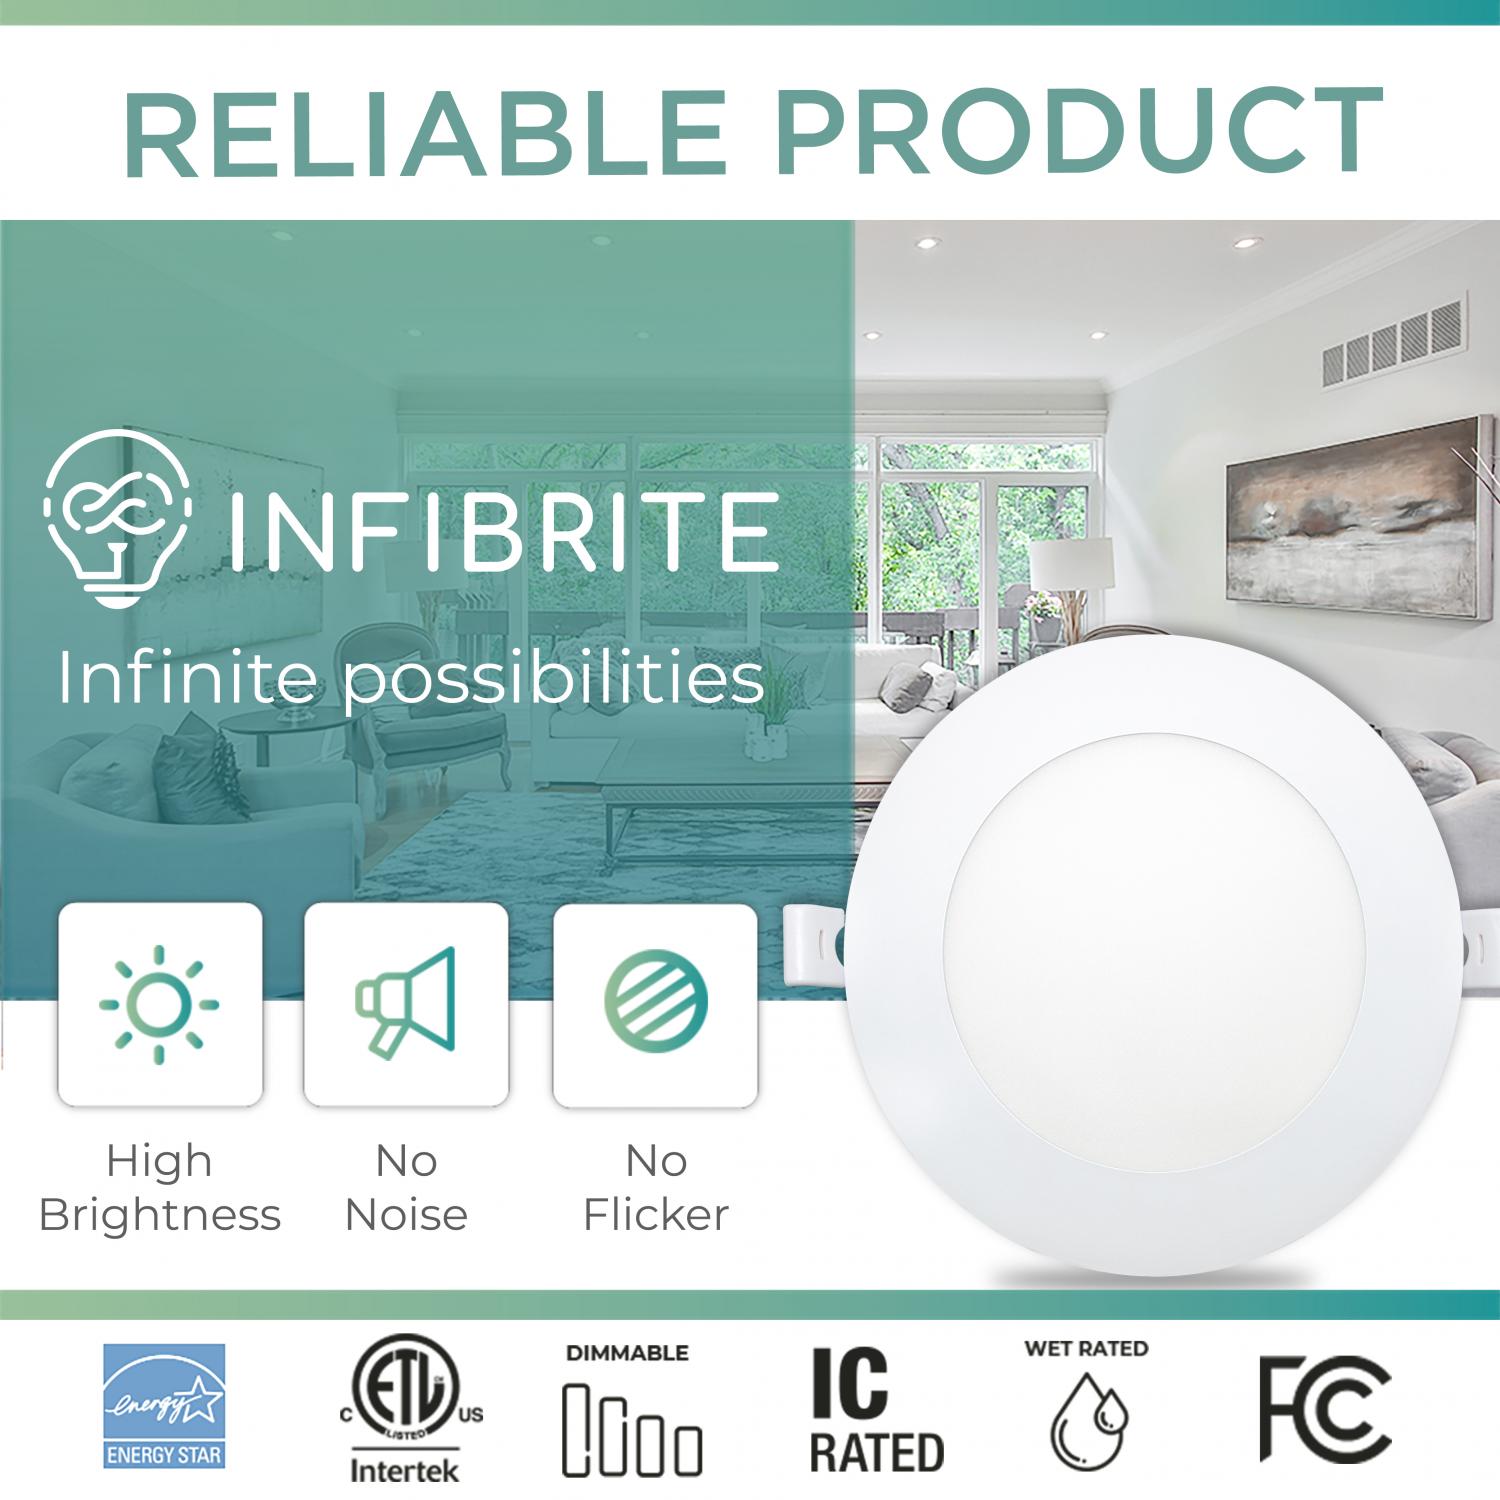 Infibrite 6 Inch 4000K Cool White 12W 1050LM Ultra-Slim LED Ceiling Light with Junction Box, Flush Mount, Dimmable, Fixture for Bedroom, Wet Rated for Bathroom, Easy Install, 110W Eqv, ETL & Energy Star, US Company